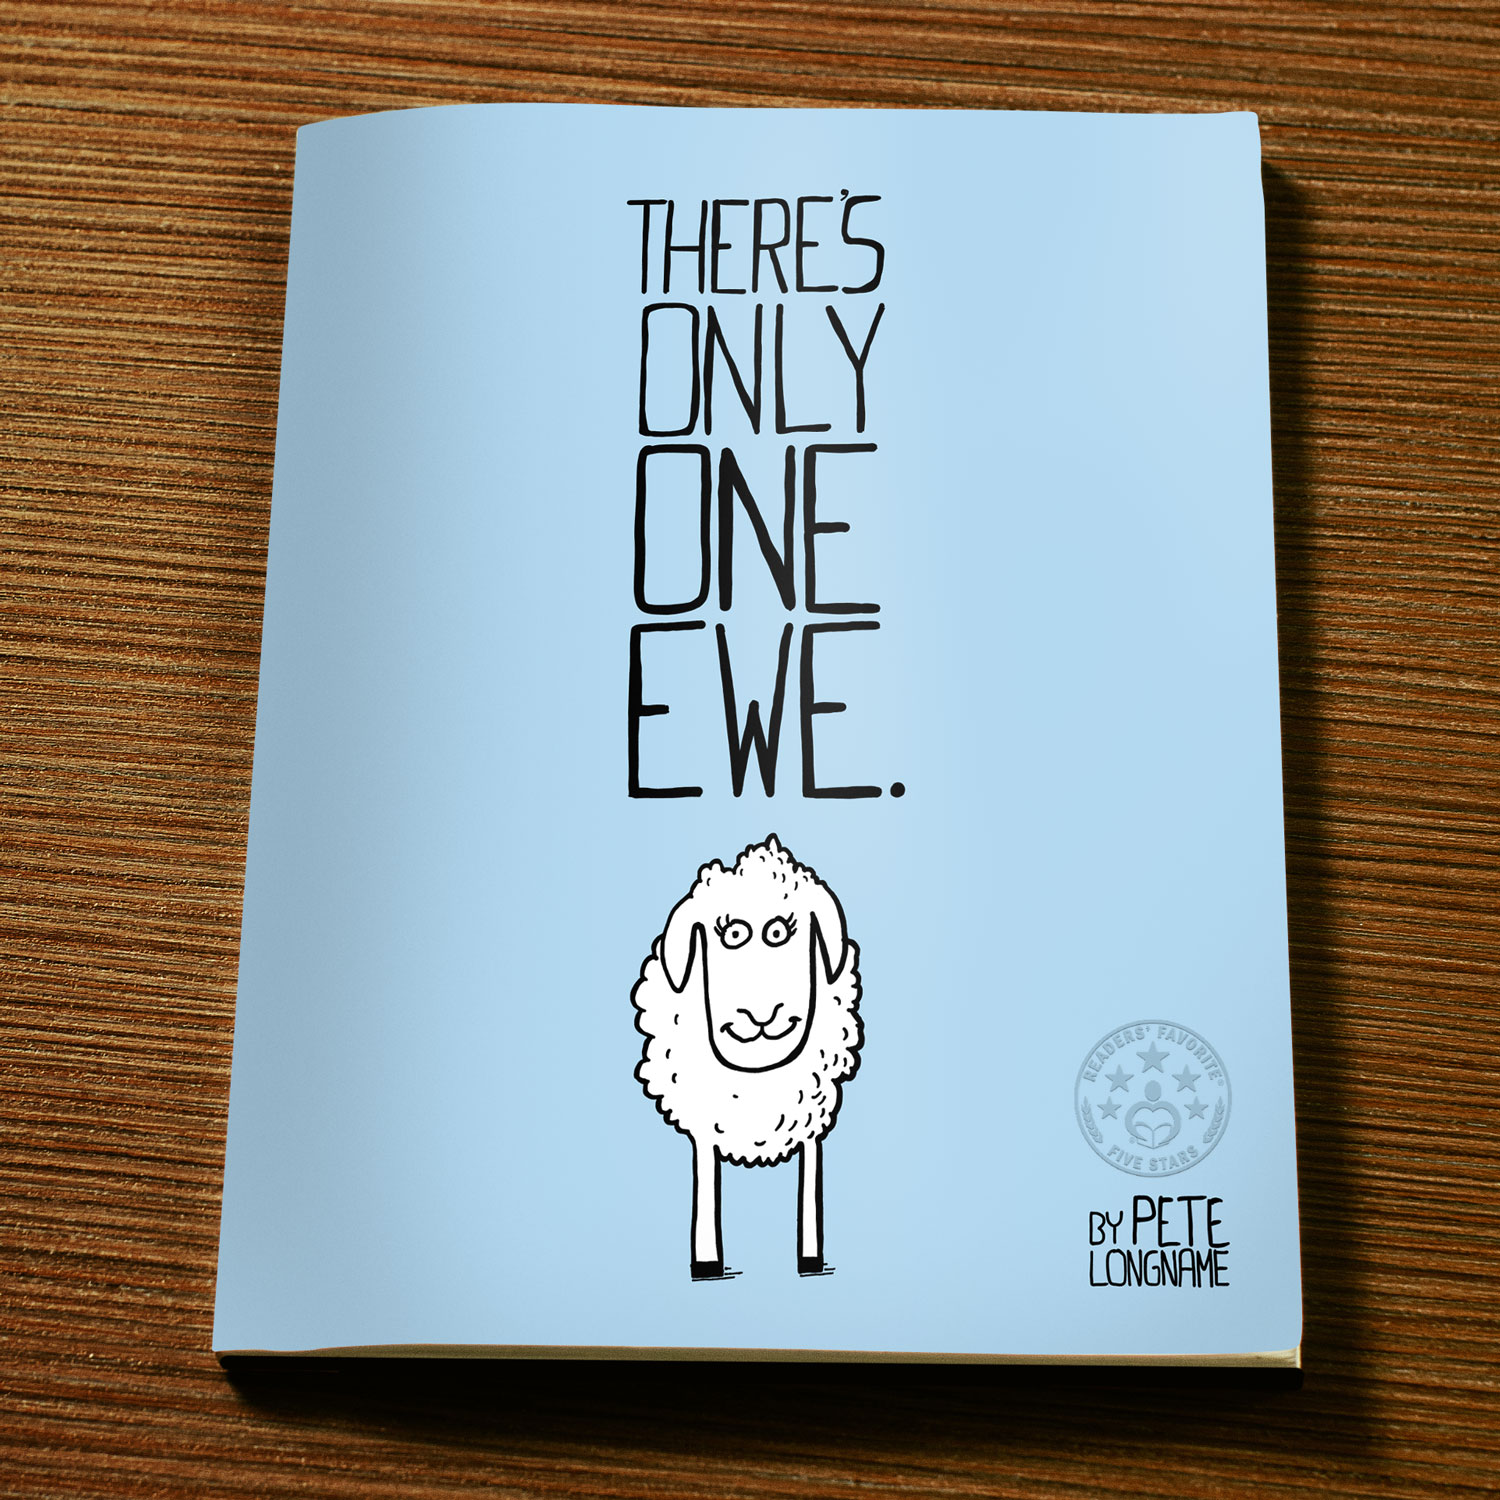 Fun, positive children's book about a lamb or ewe.